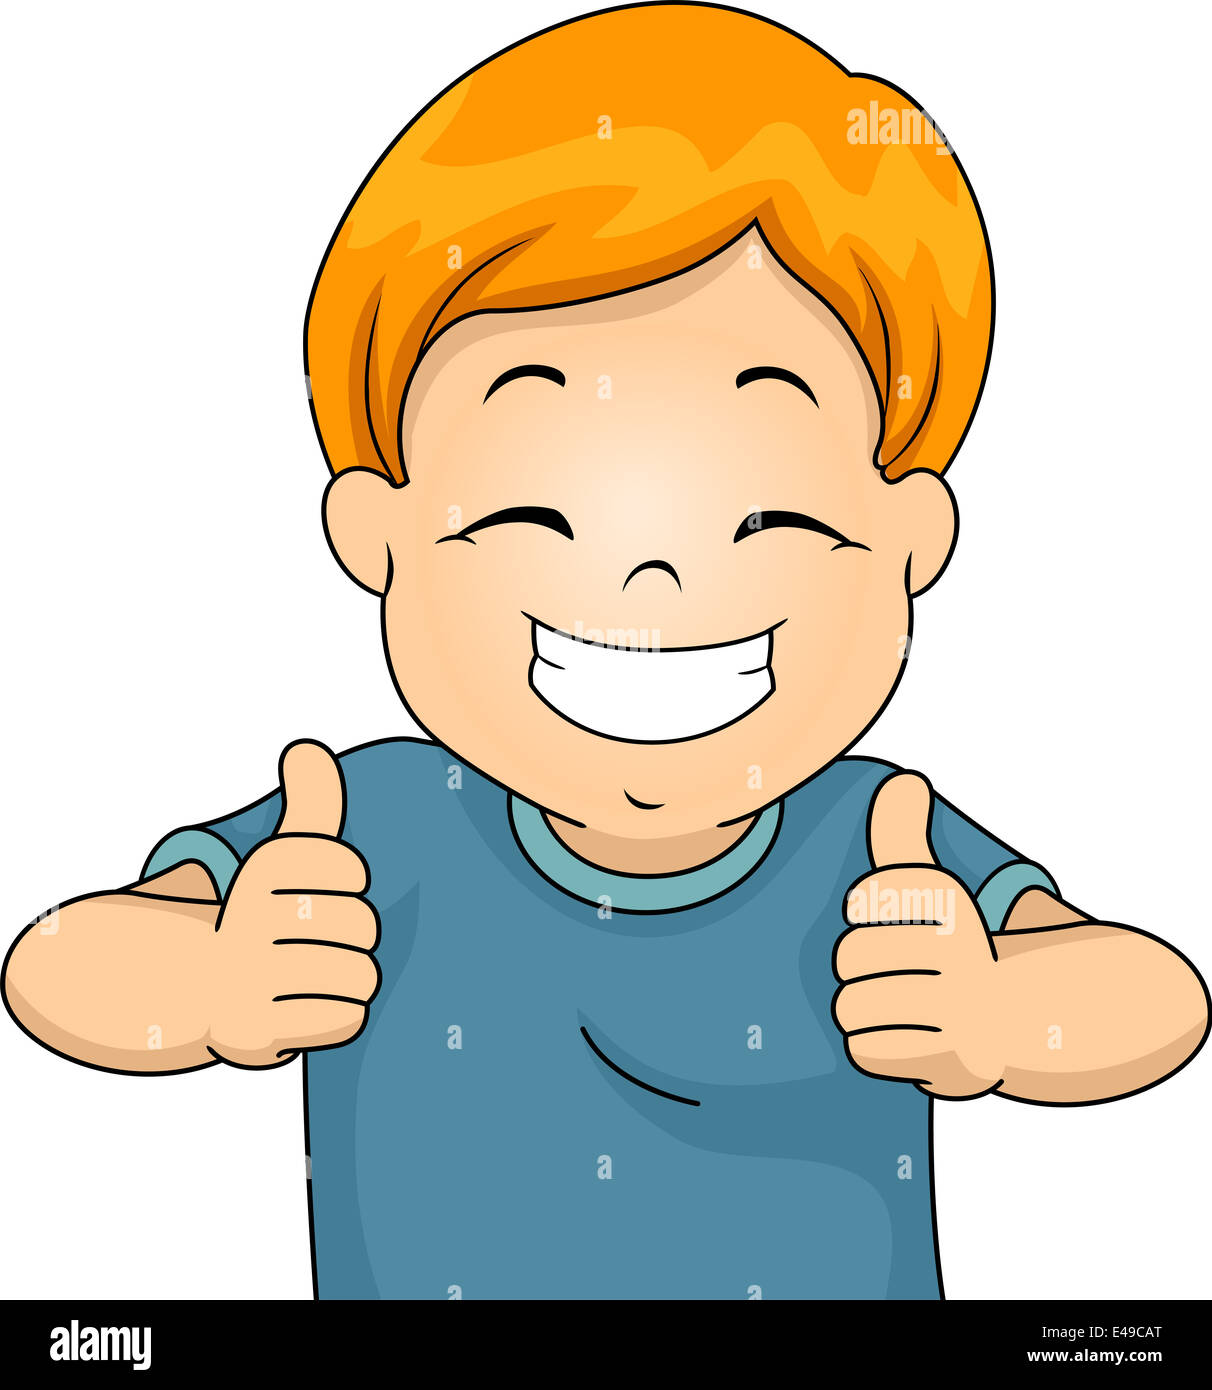 Illustration of a Little Boy Giving Two Thumbs Up Stock Photo - Alamy